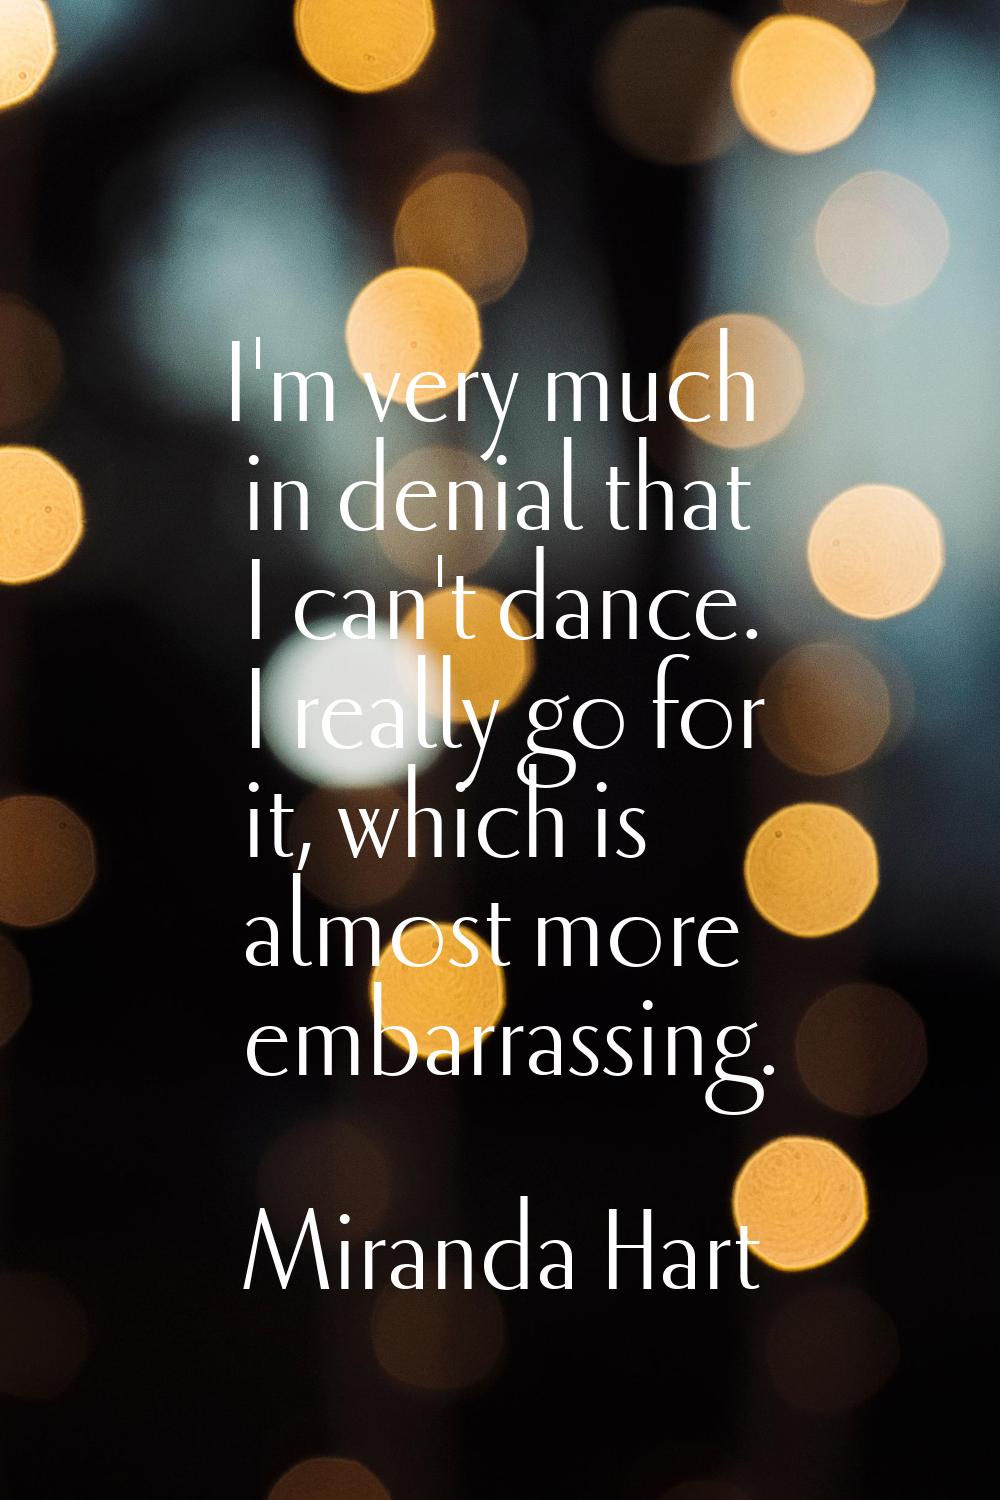 I'm very much in denial that I can't dance. I really go for it, which is almost more embarrassing.